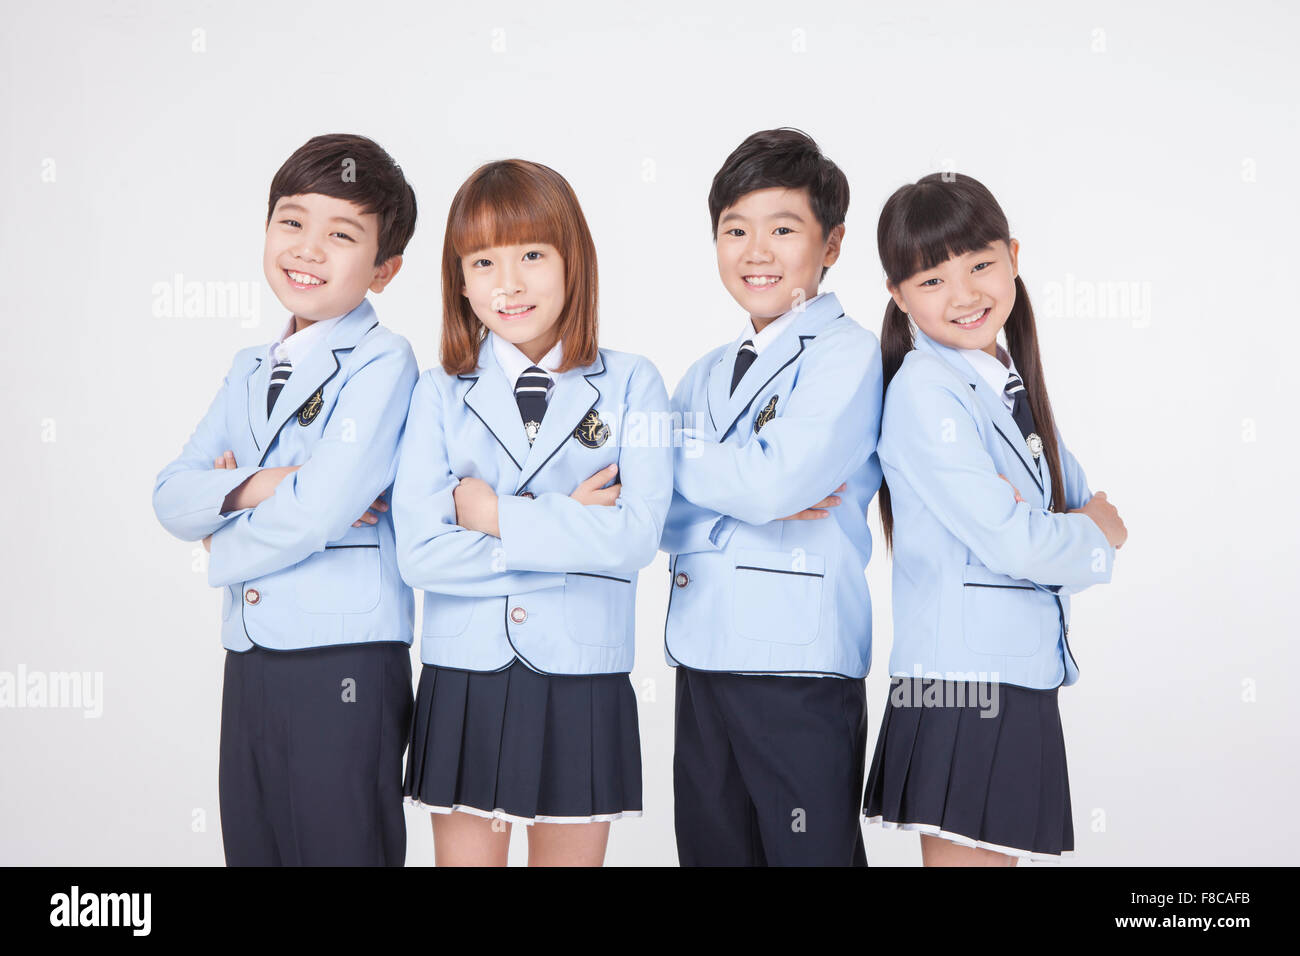 Four elementary school age kids in school uniforms consisting of two girls and two boys standing together with their arms folded Stock Photo